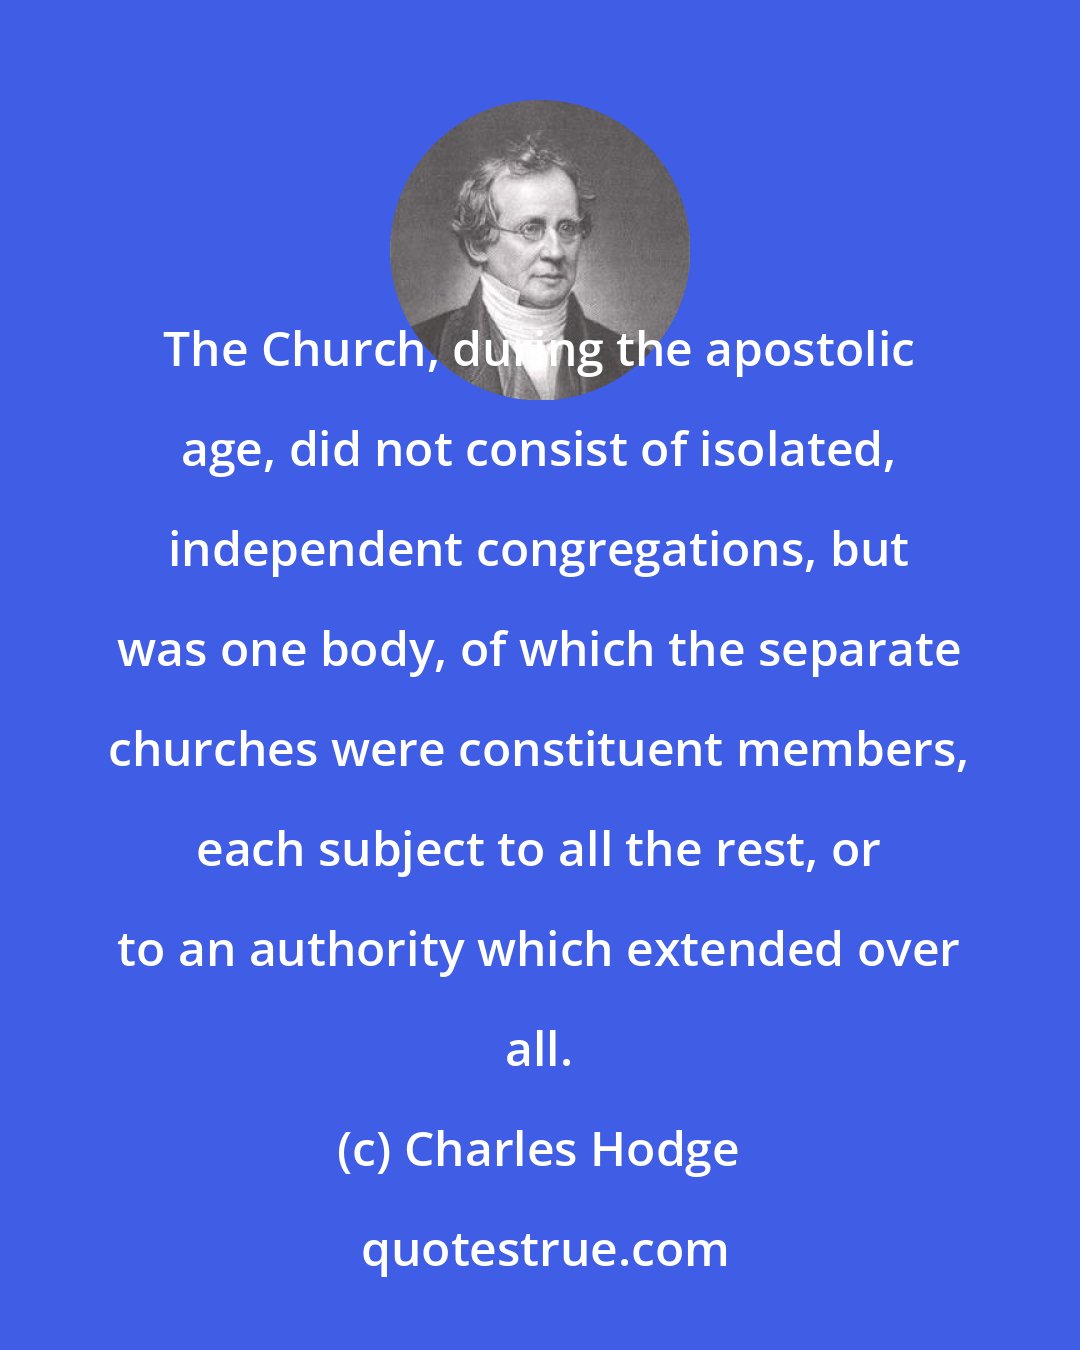 Charles Hodge: The Church, during the apostolic age, did not consist of isolated, independent congregations, but was one body, of which the separate churches were constituent members, each subject to all the rest, or to an authority which extended over all.